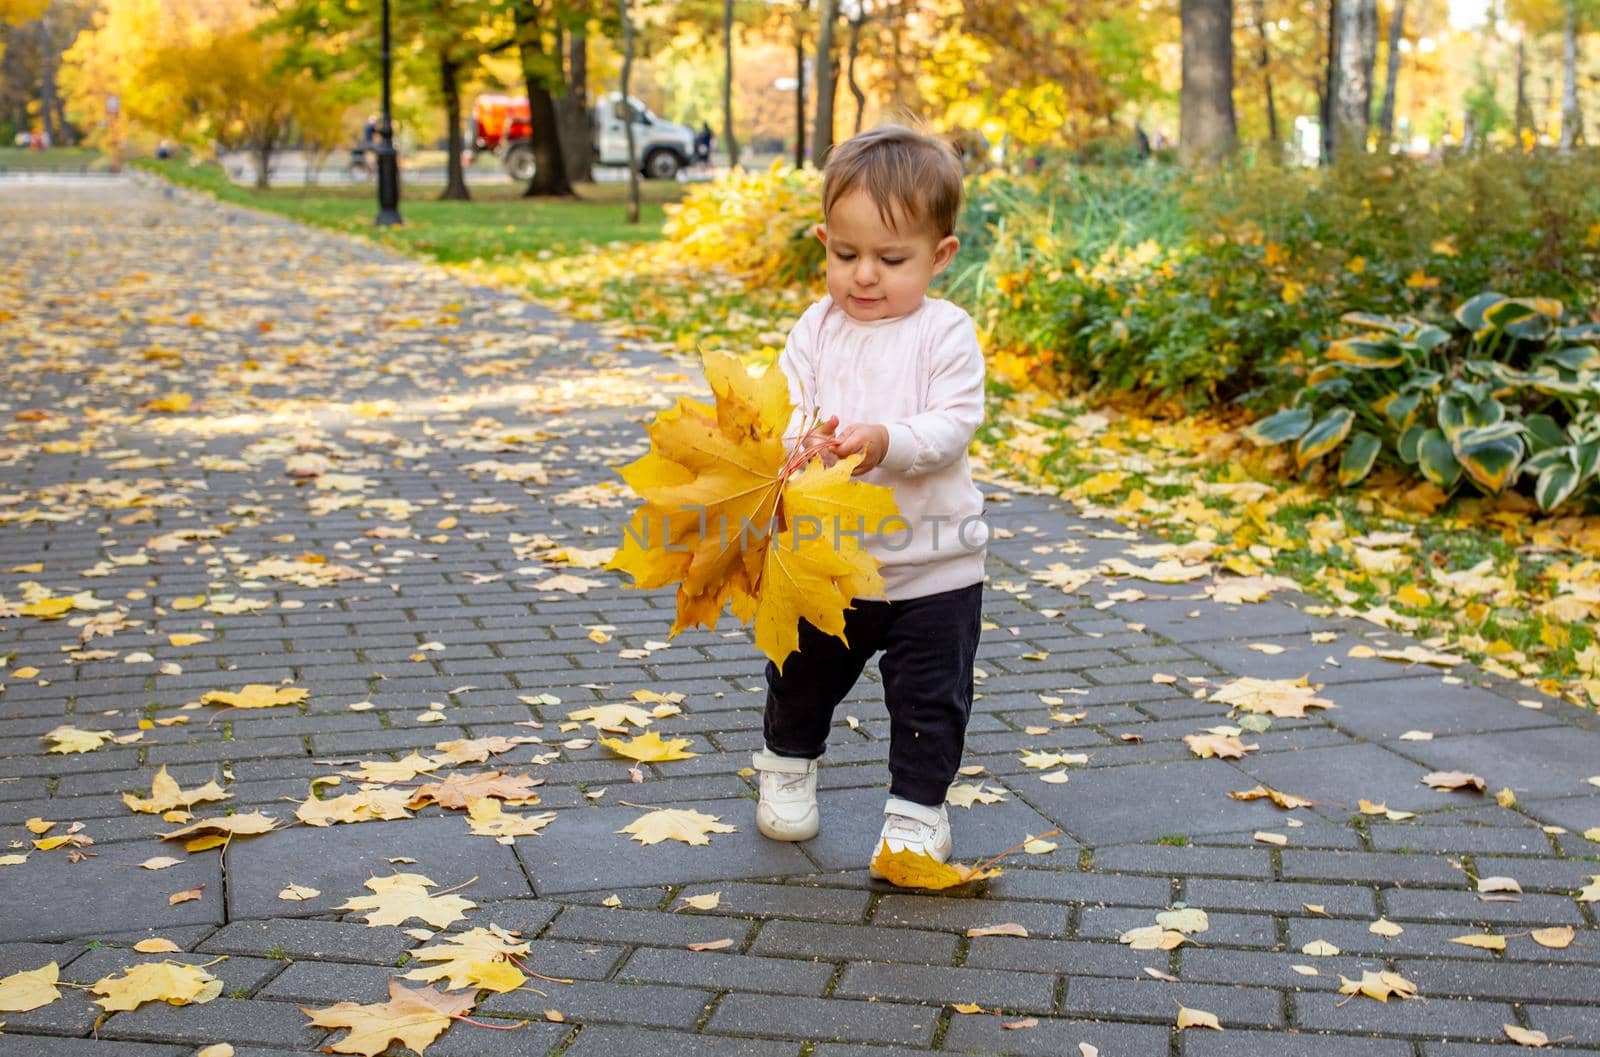 adorable toddler playing with fallen maple leaves in autumn park. baby carries mom a bouquet of yellow maple leaves